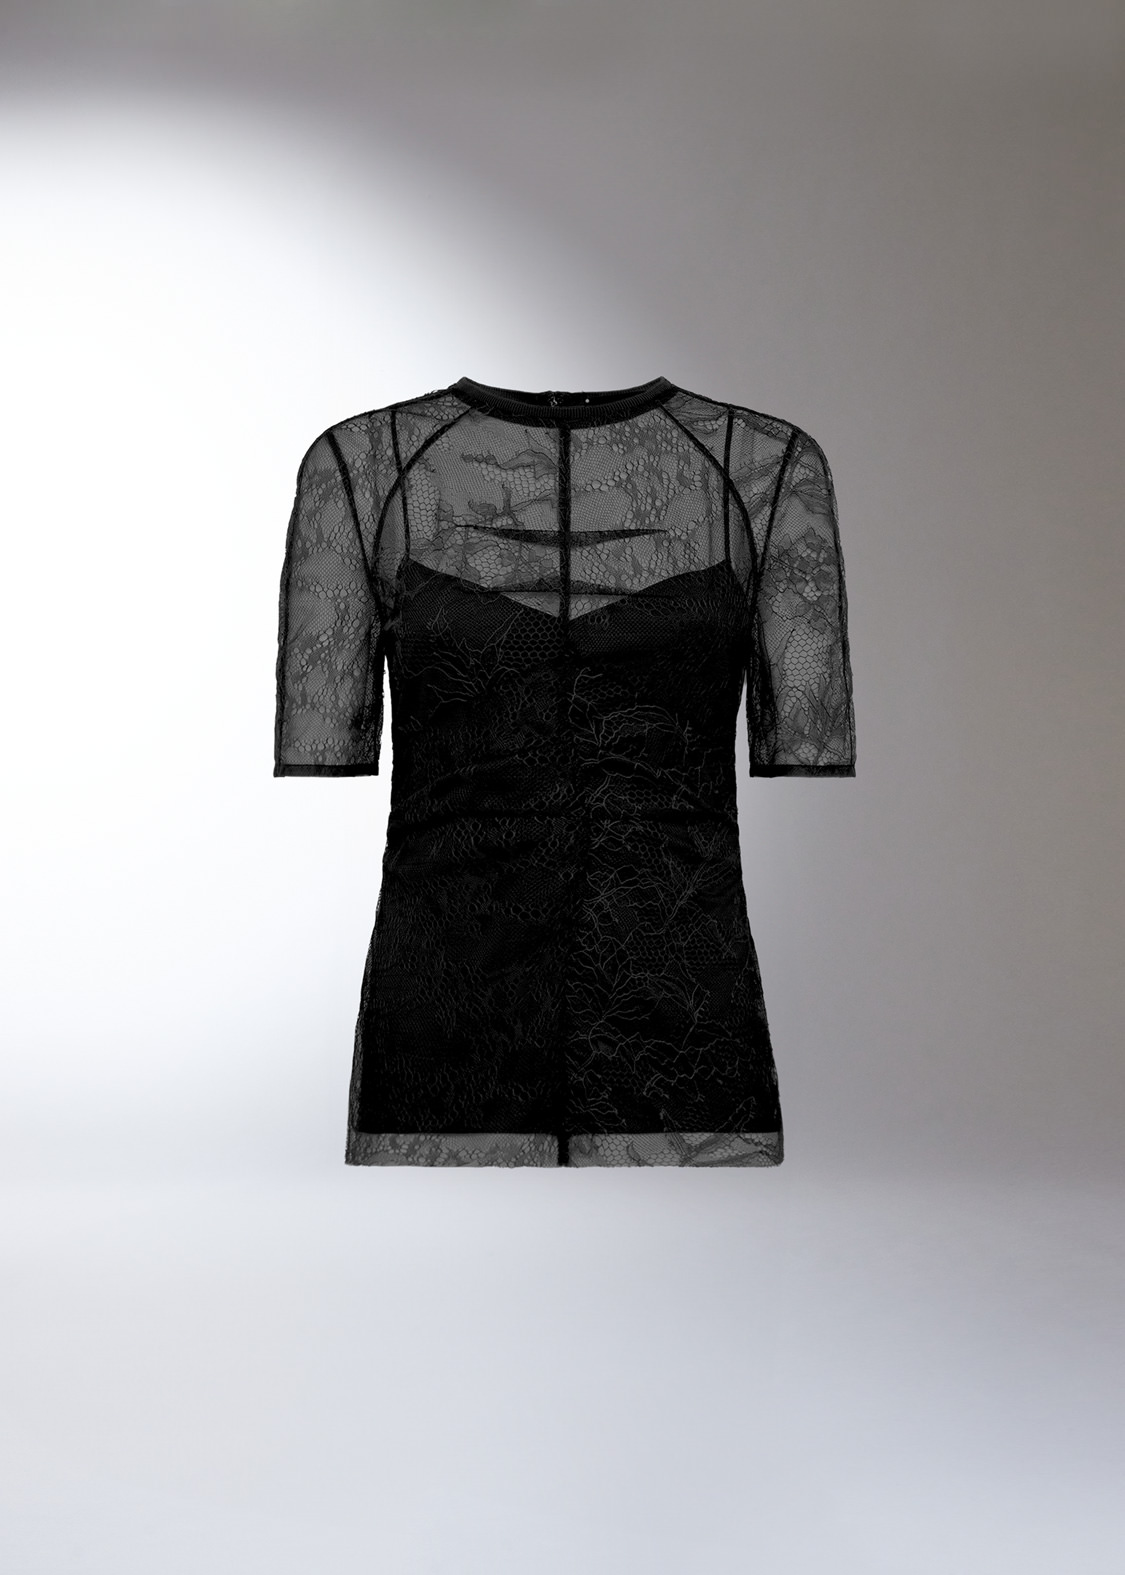 DEL CORE: T-SHIRT IN PIZZO